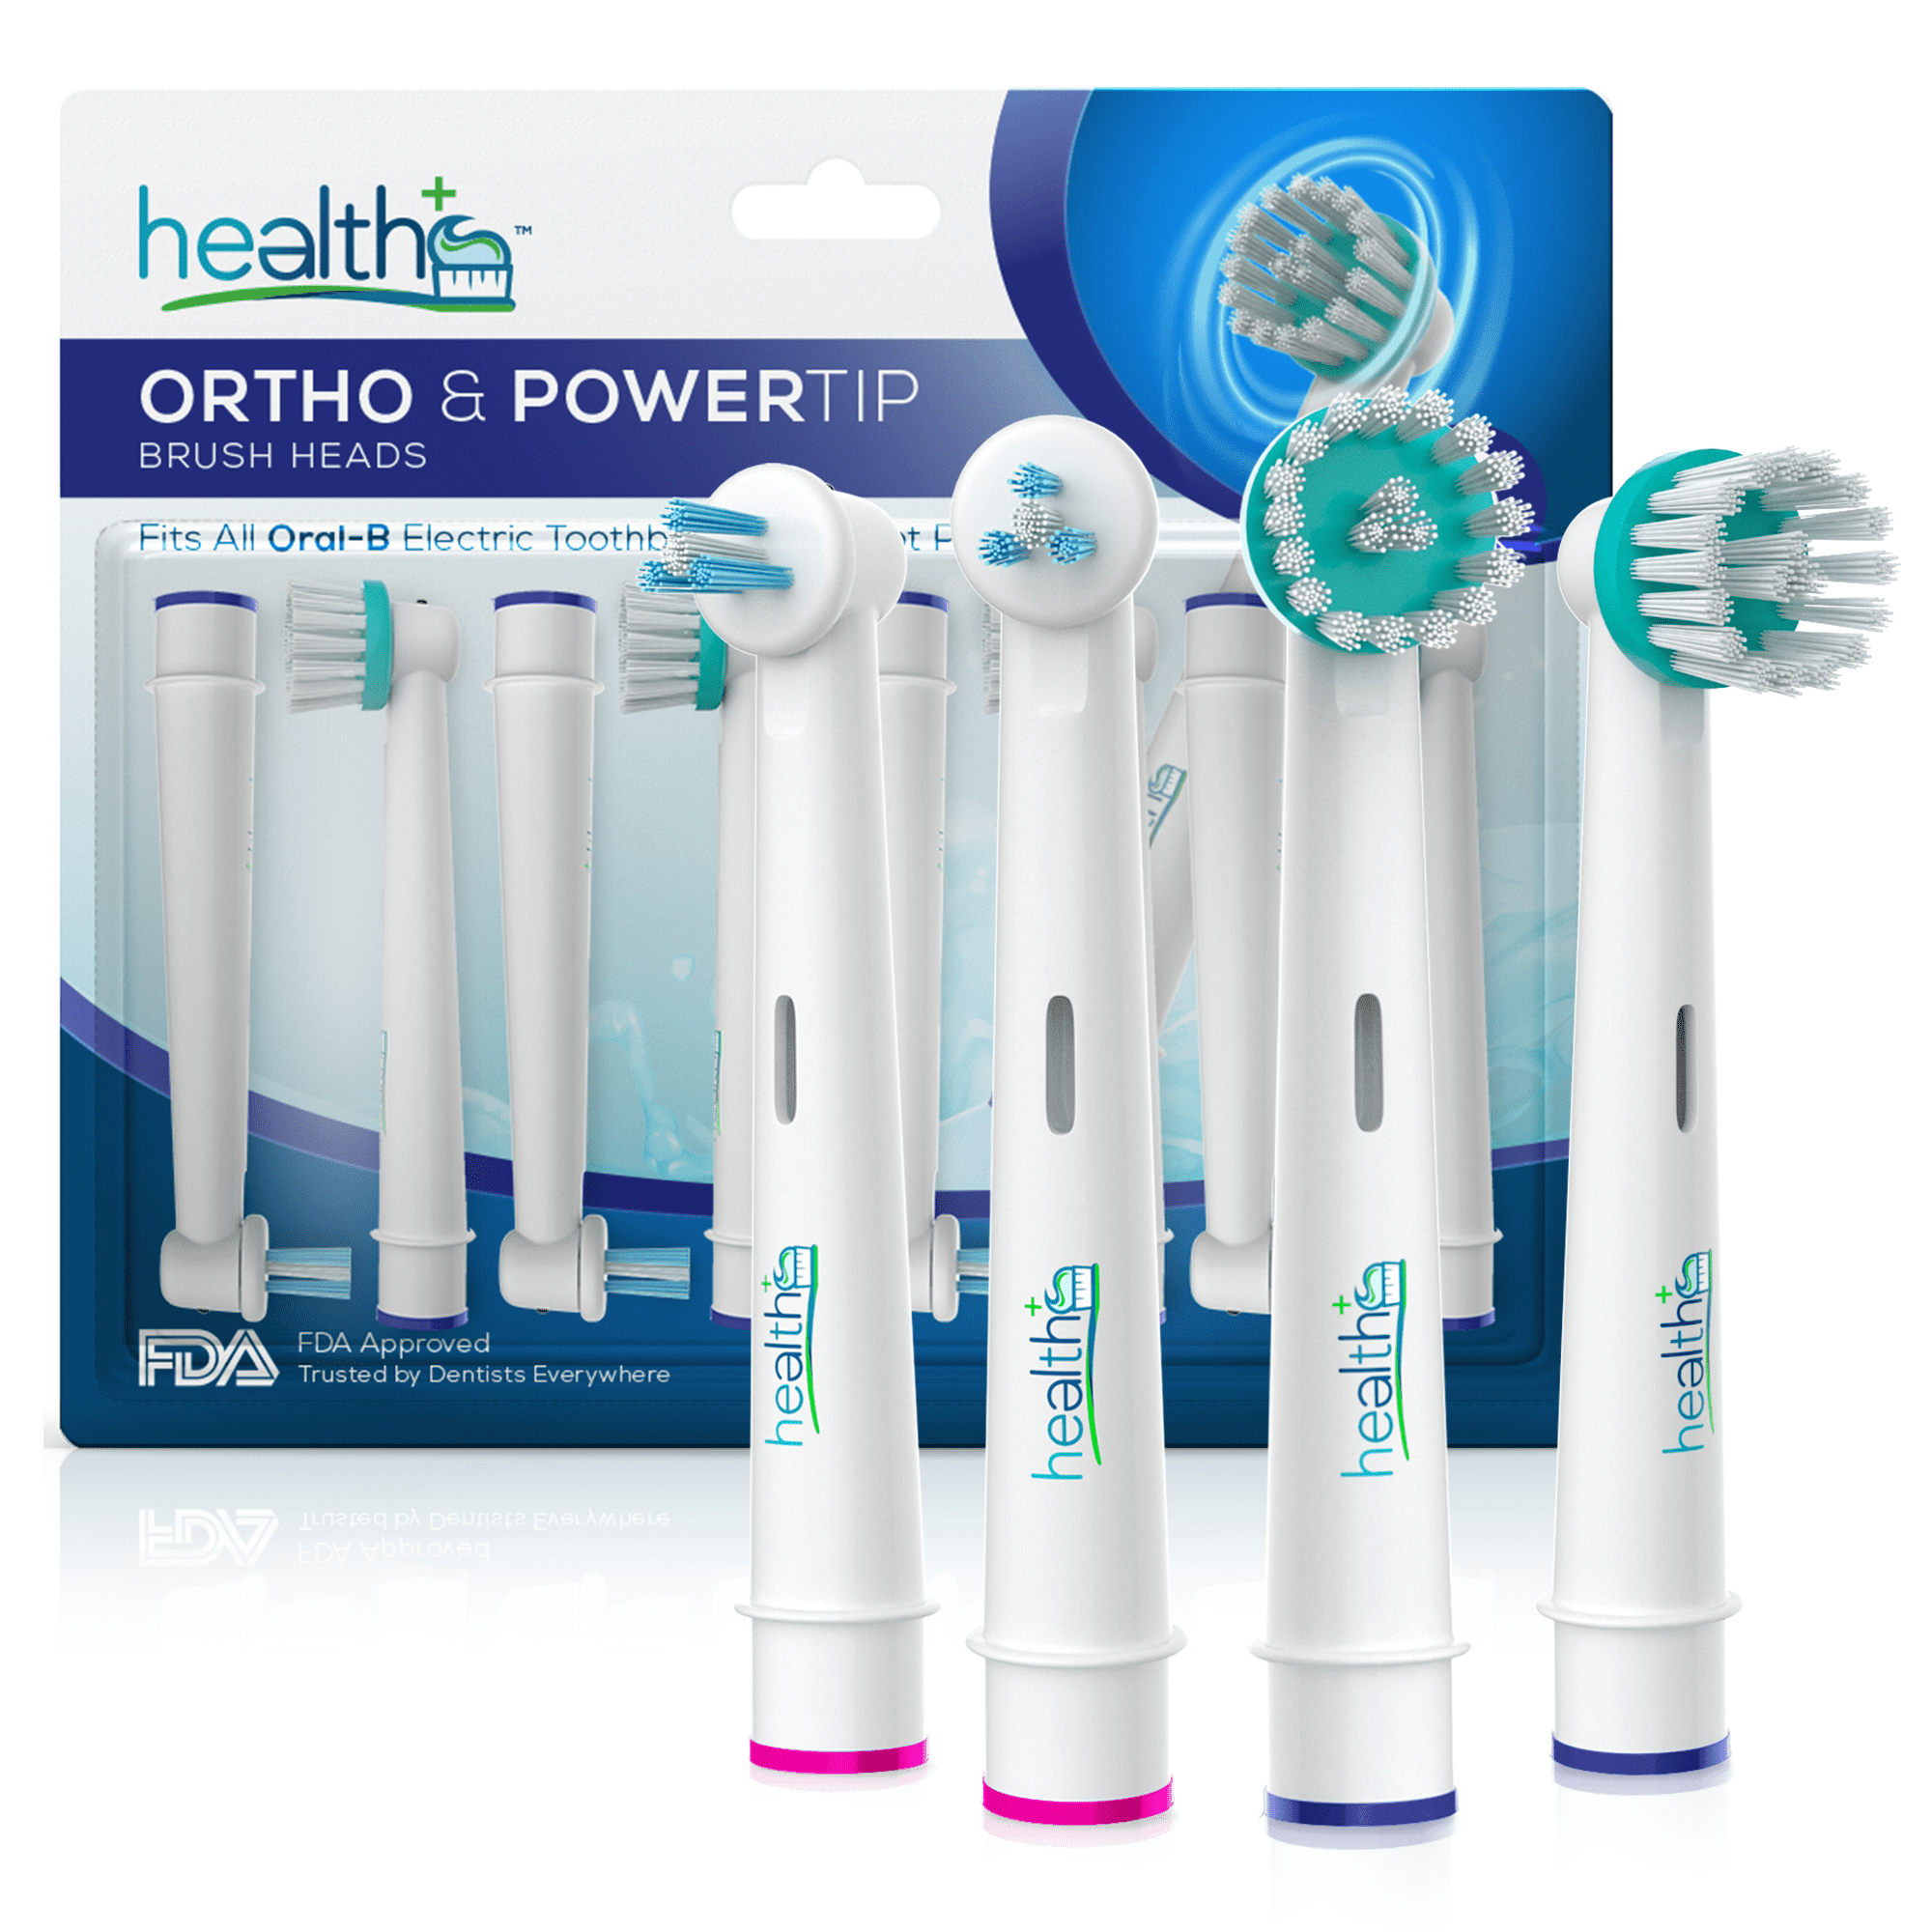 oral-b-electric-toothbrush-ortho-and-power-tip-bristle-generic